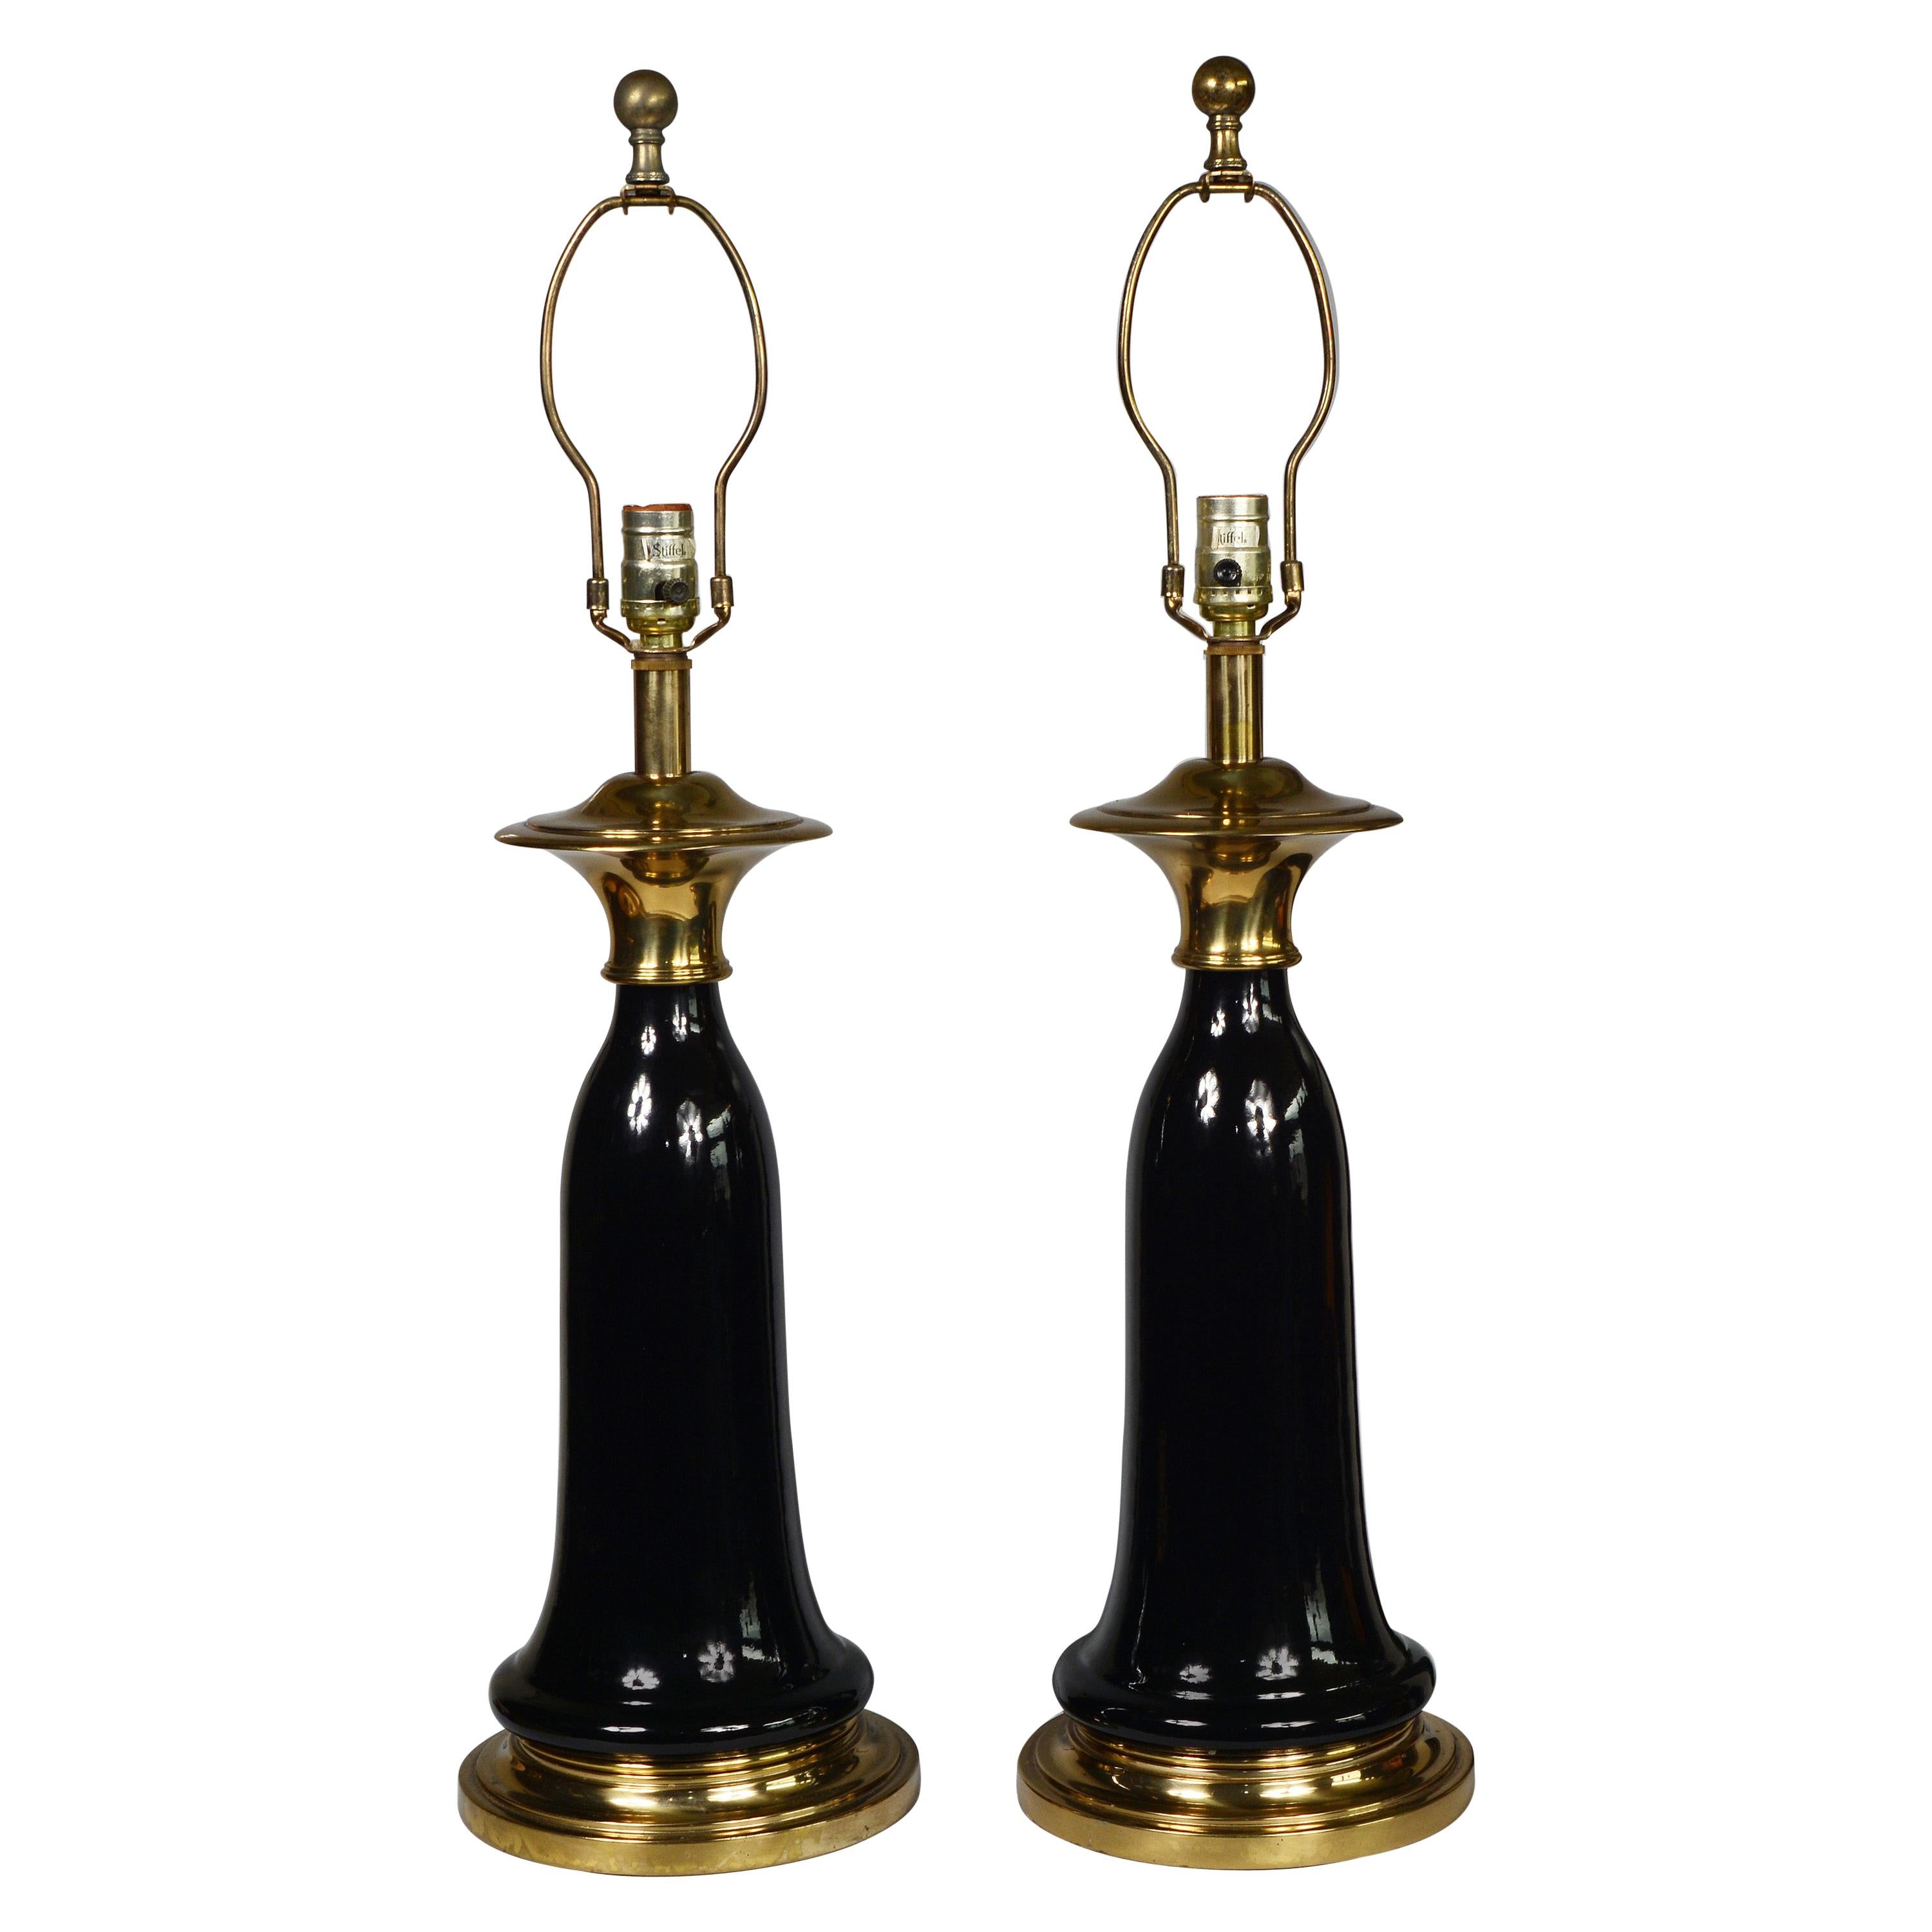 Pair of Stiffel Brass and Ceramic Tassel Form Table Lamps